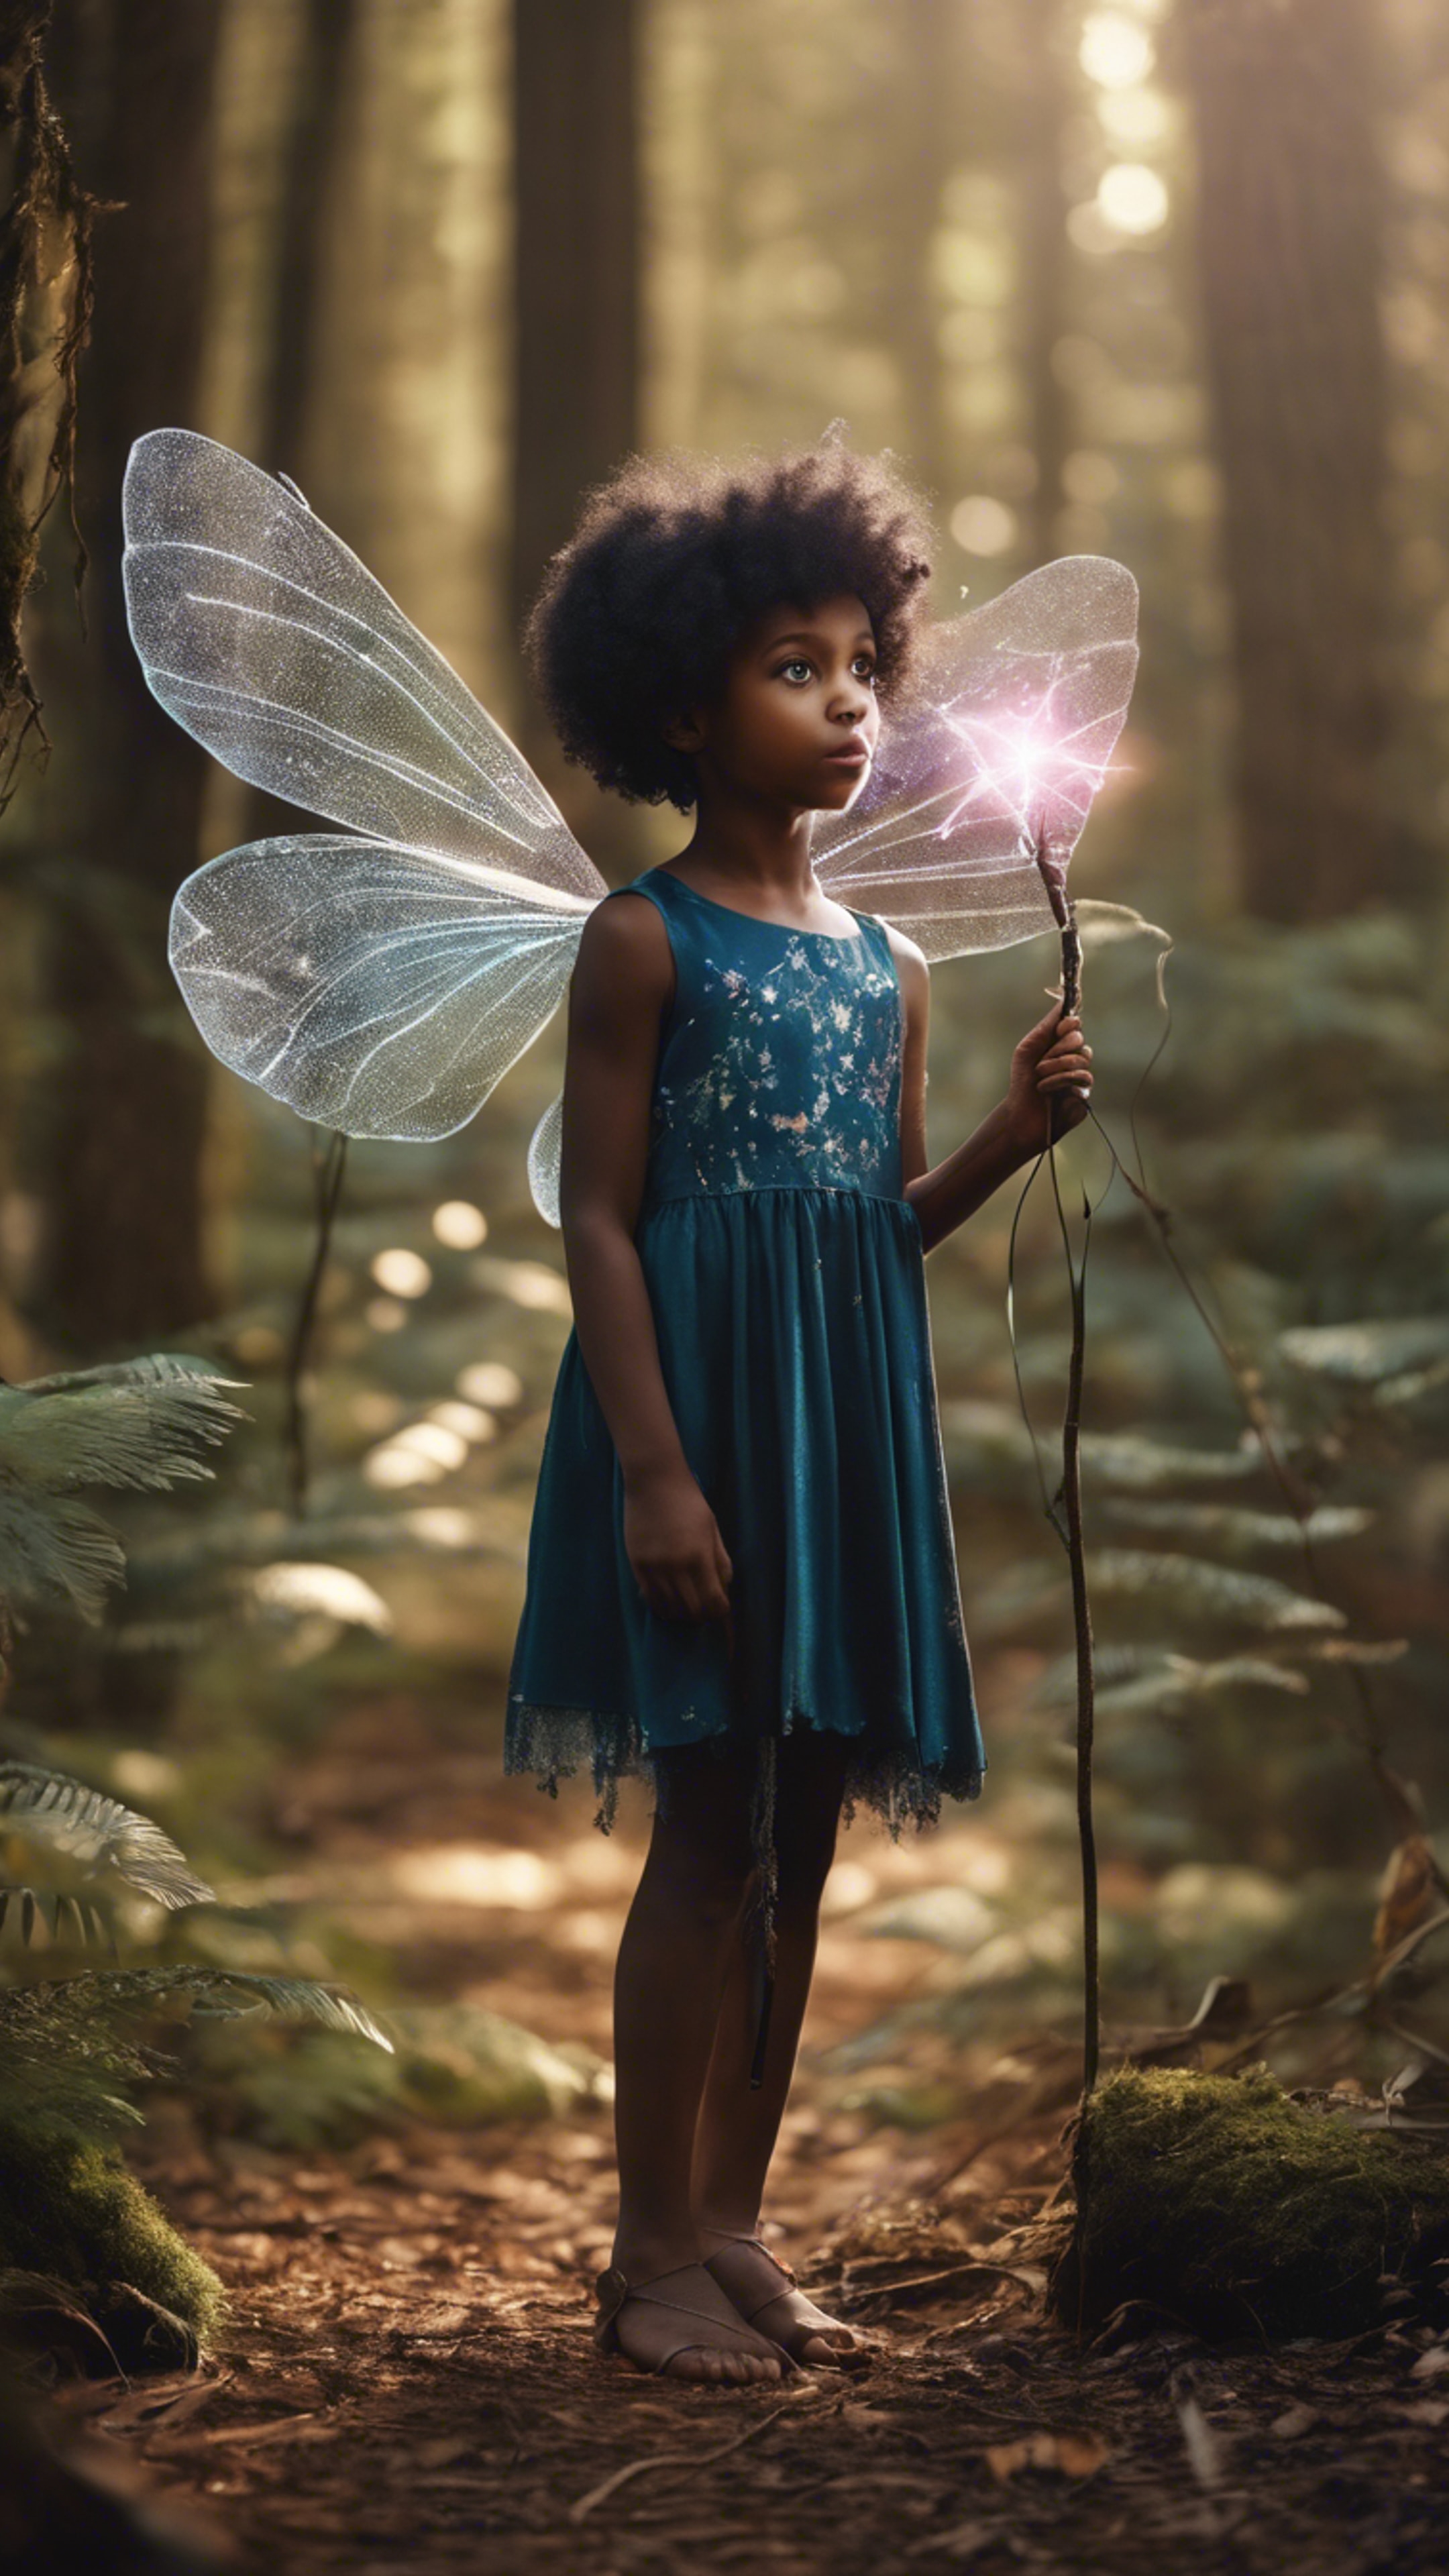 A cute image of a black girl wearing fairy wings, holding a magic wand in a mystical forest. Wallpaper[6c77347a4892474c928d]